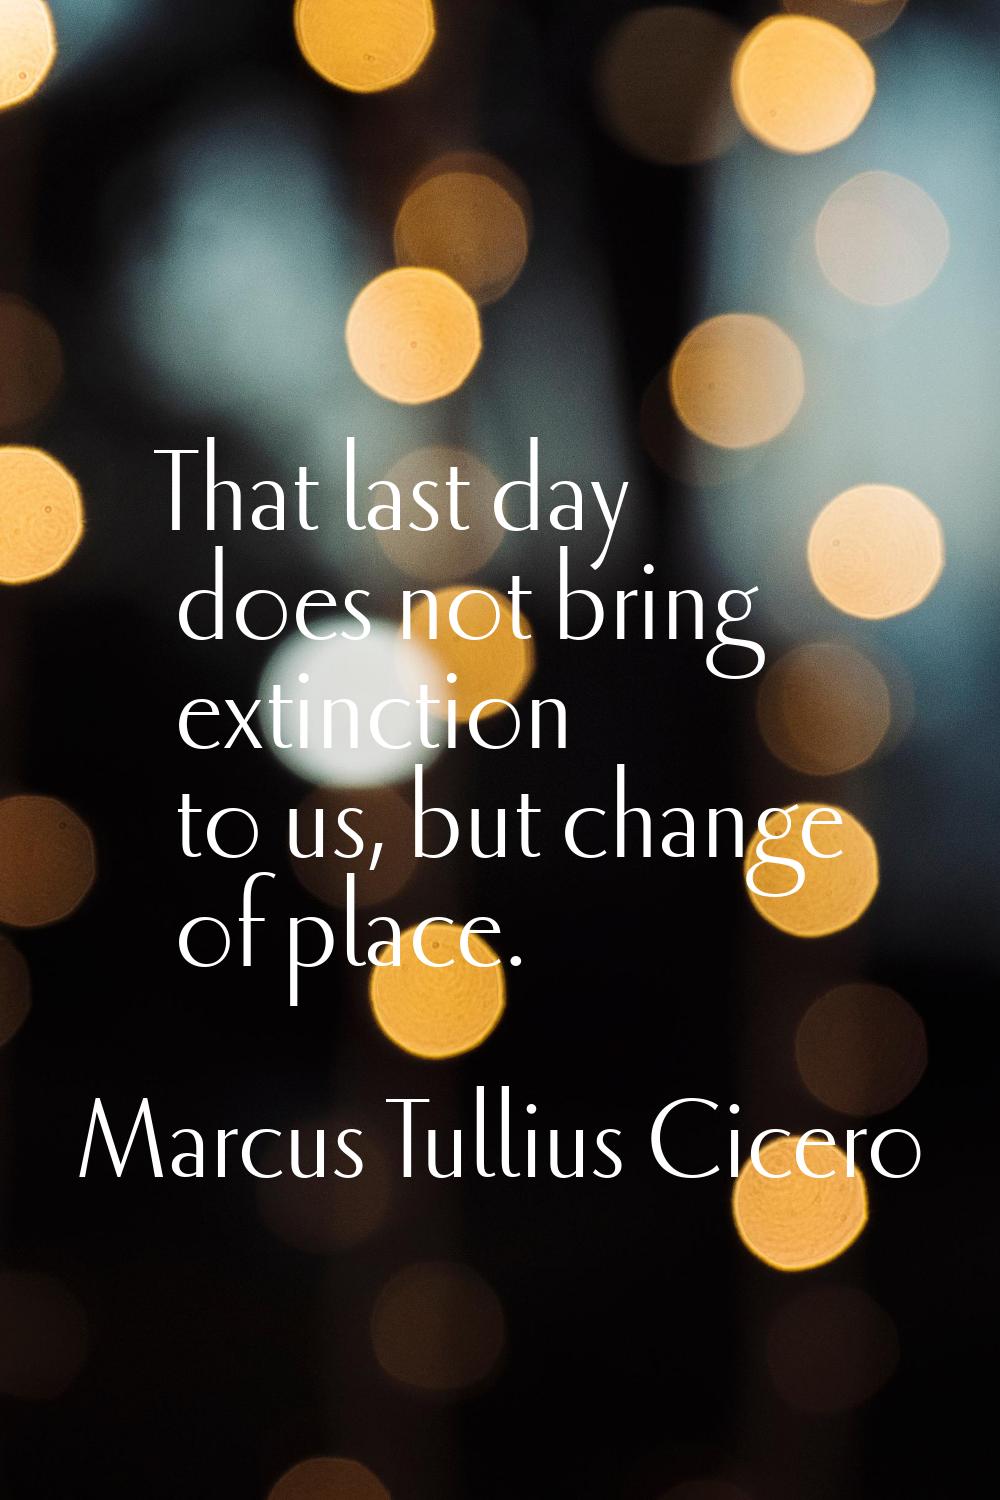 That last day does not bring extinction to us, but change of place.